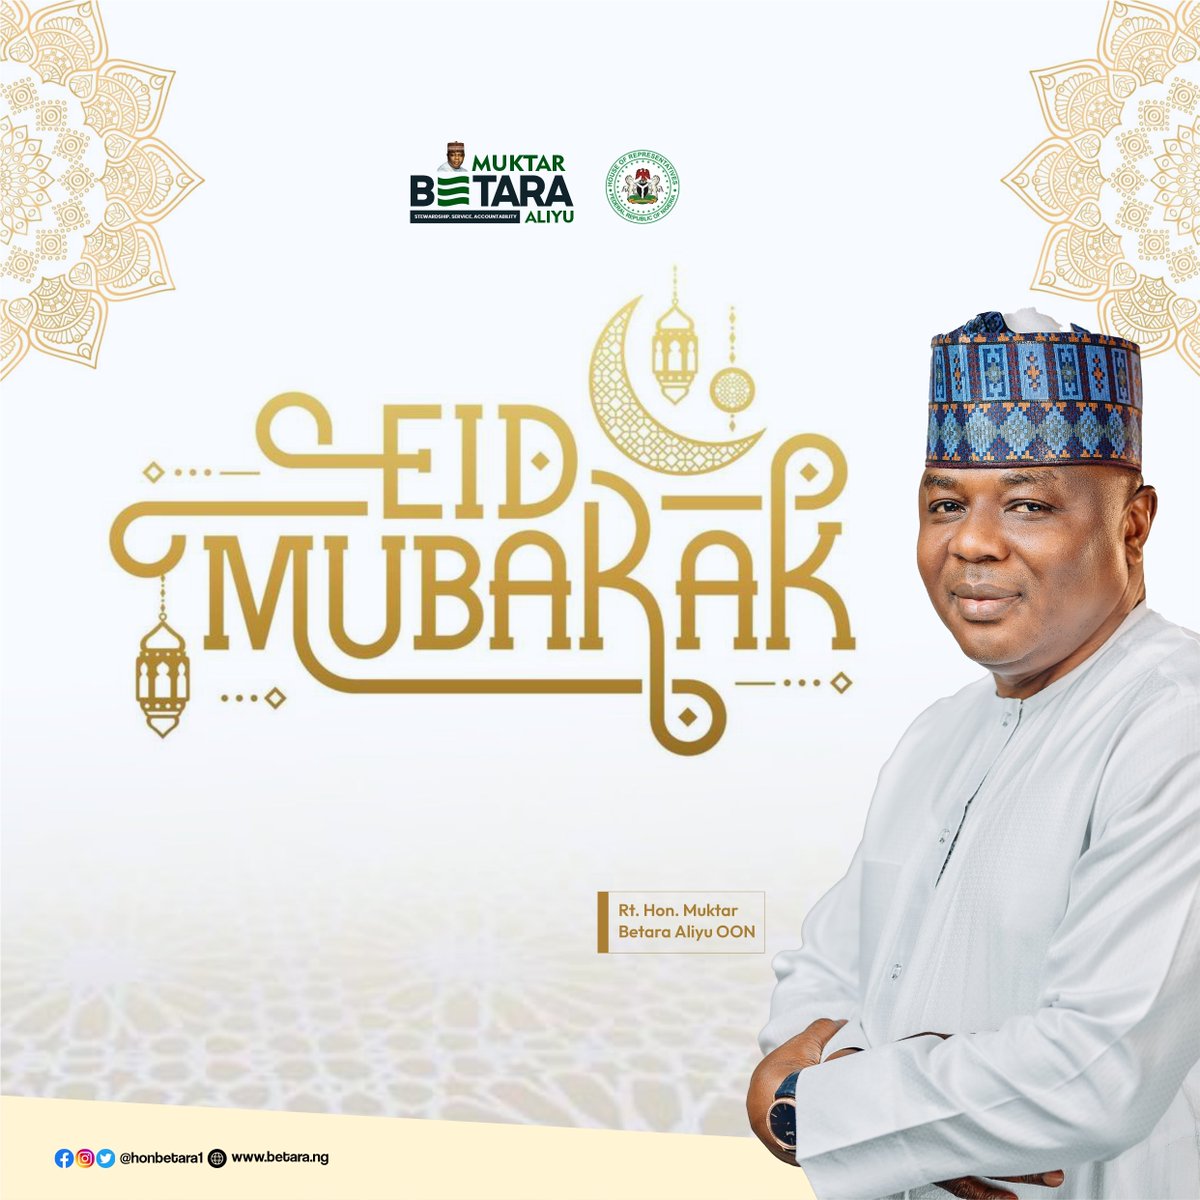 Eid Mubarak! I pray this Eid brings peace, prosperity, joy and fulfillment to everyone and our dear nation at large and may Allah accept our prayers. I wish you and your family a very happy, prosperous and blissful Eid Day! - MBA. Barka Da Sallah. #ImpactFirst